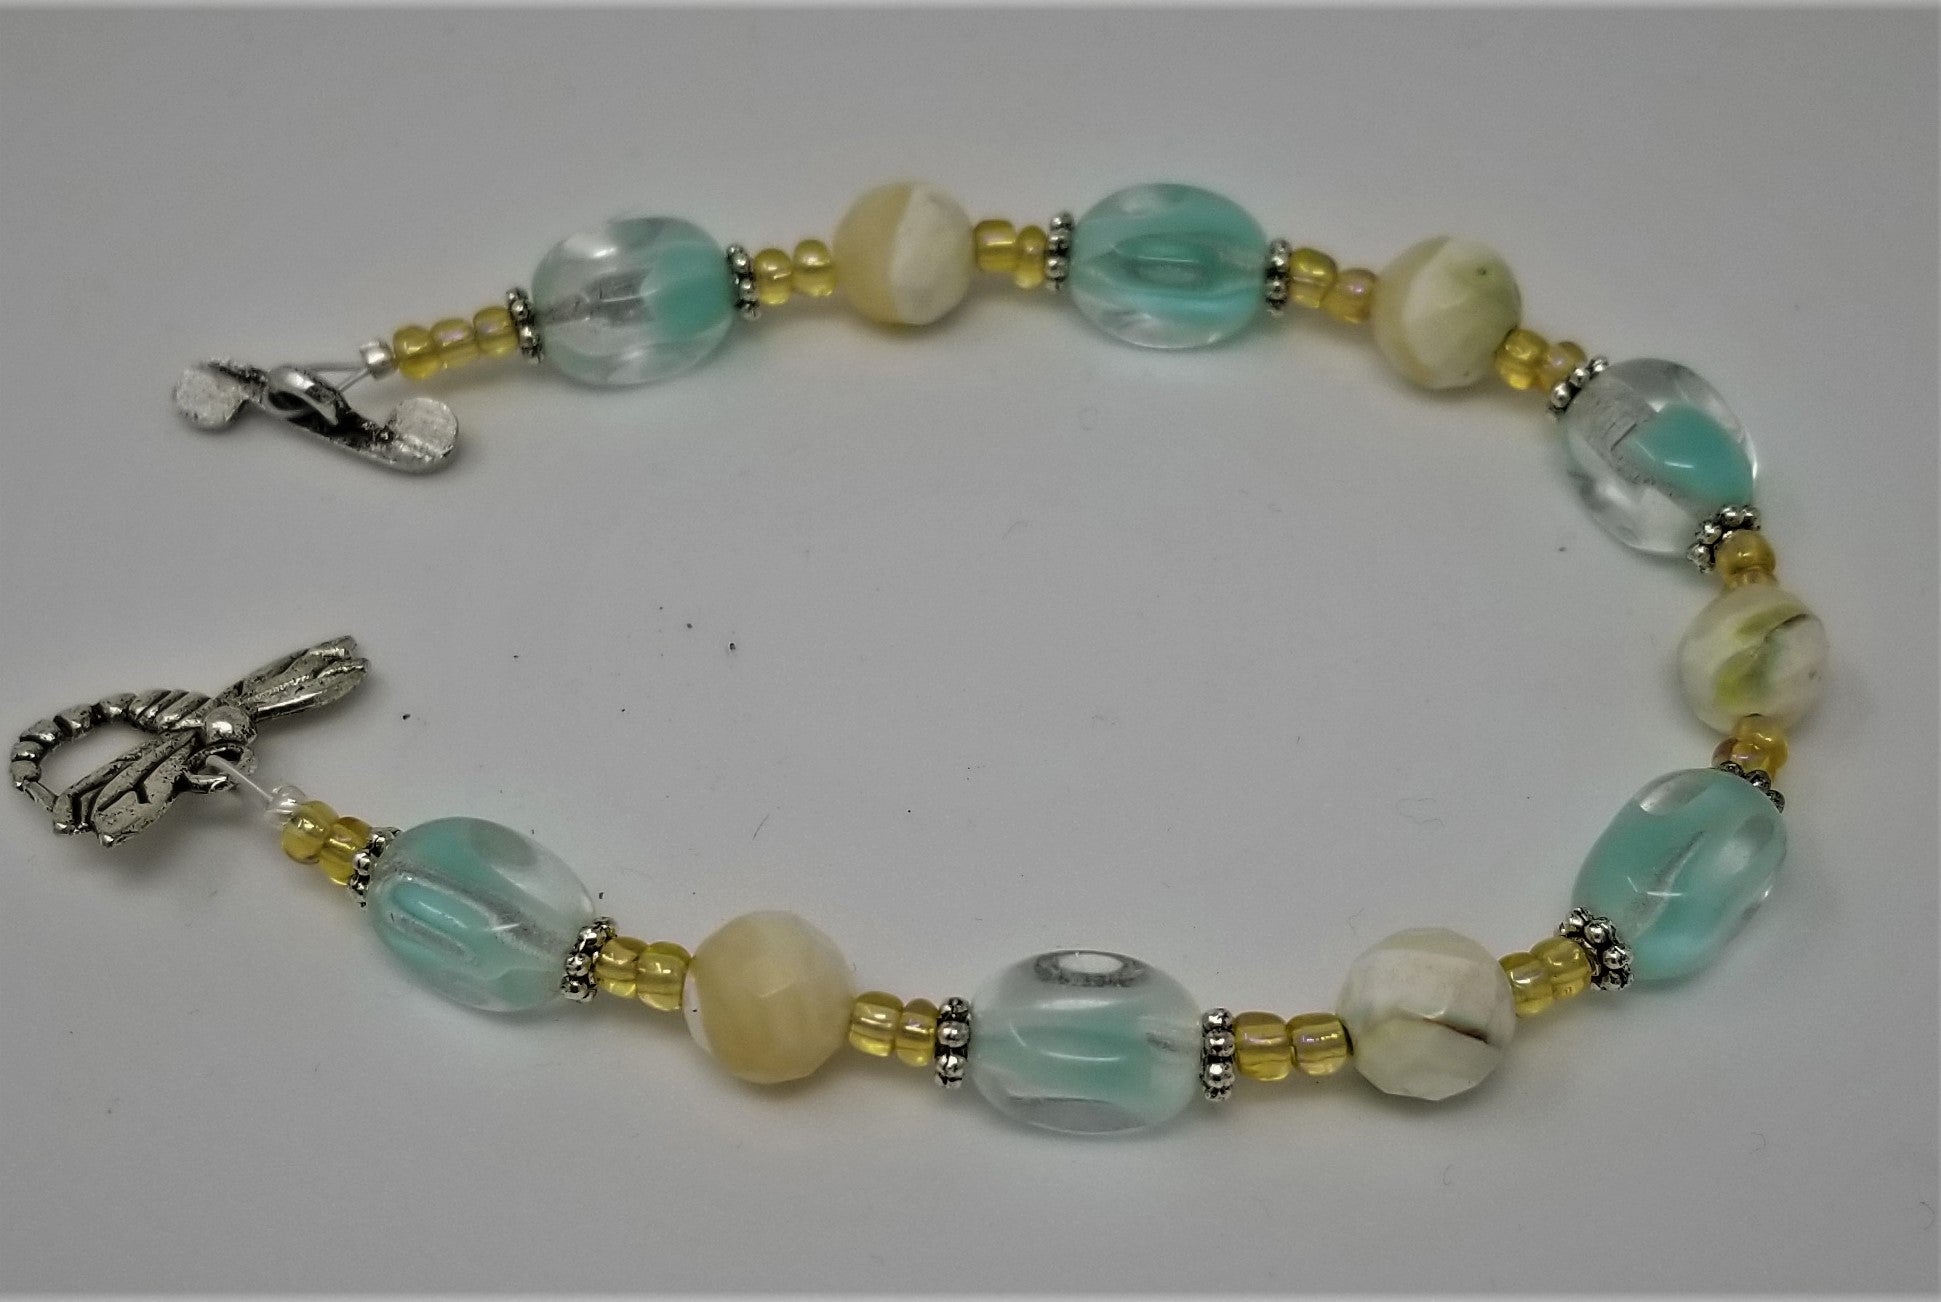 Handmade Beaded bracelet Mother of Pearl and Czech Glass Faceted Aqua Dragon Fly